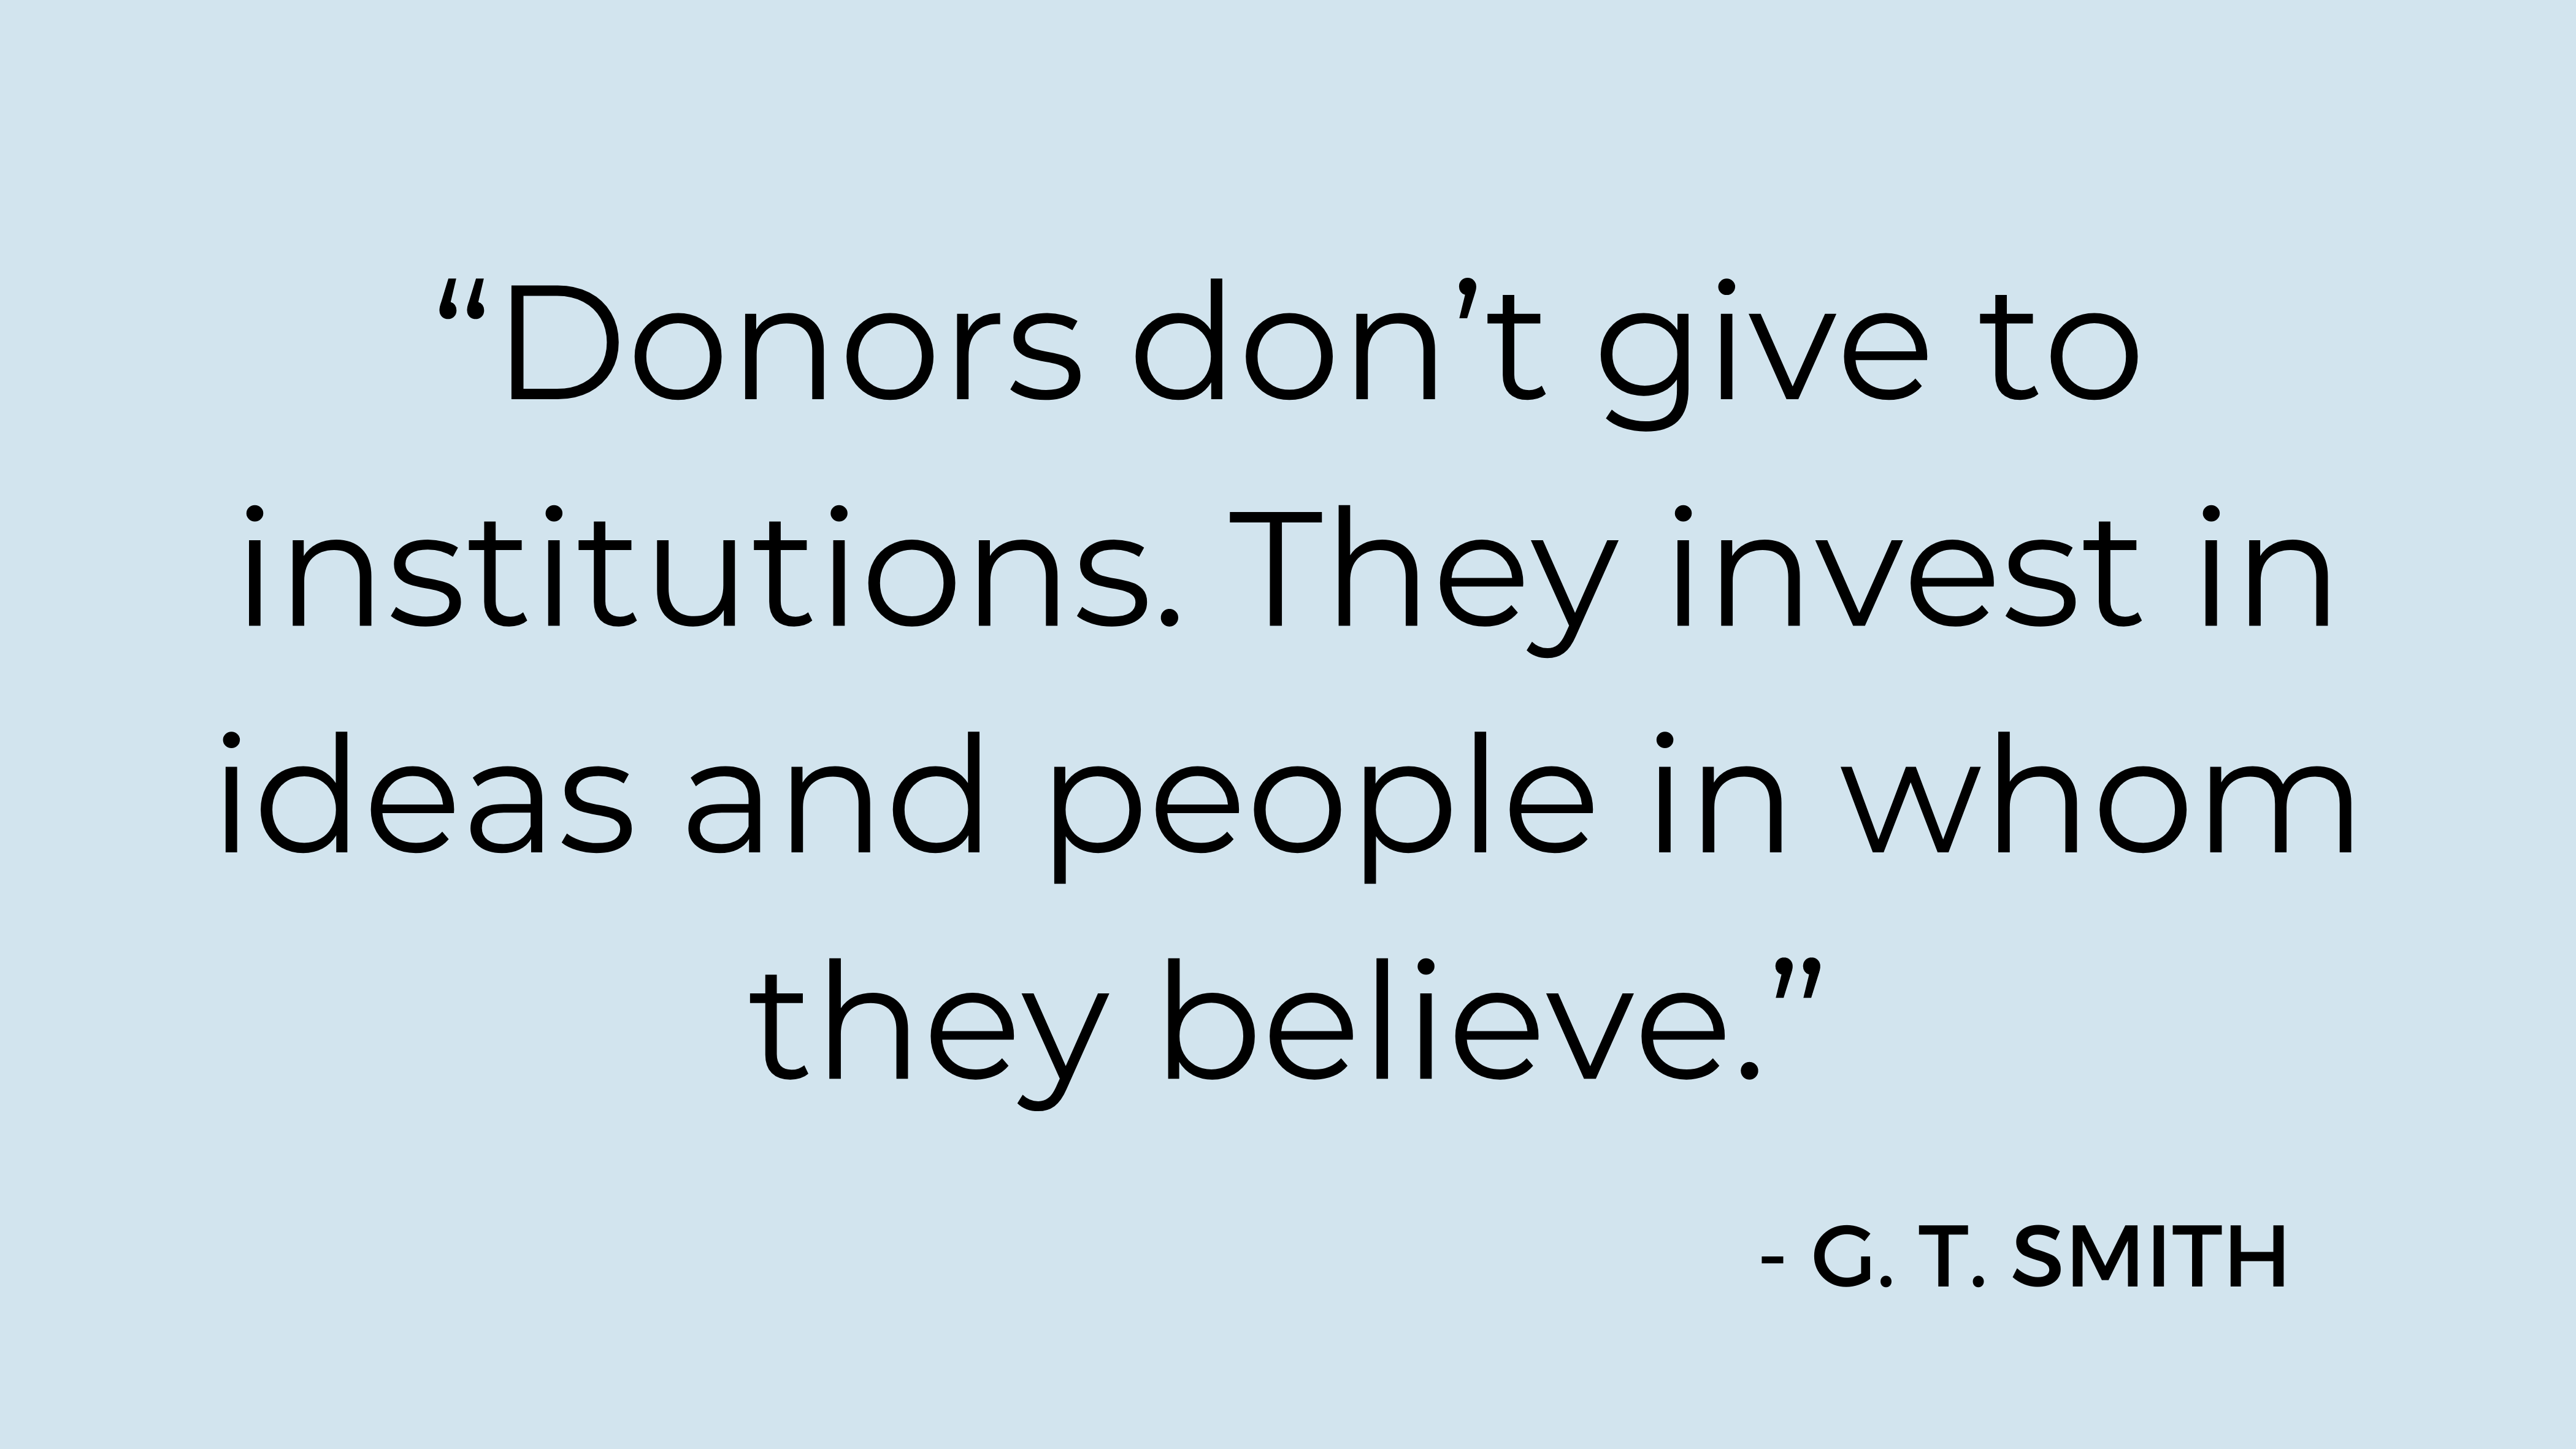 "Donors don't give to institutions. They invest in ideas and people in whom they believe." - G. T. Smith